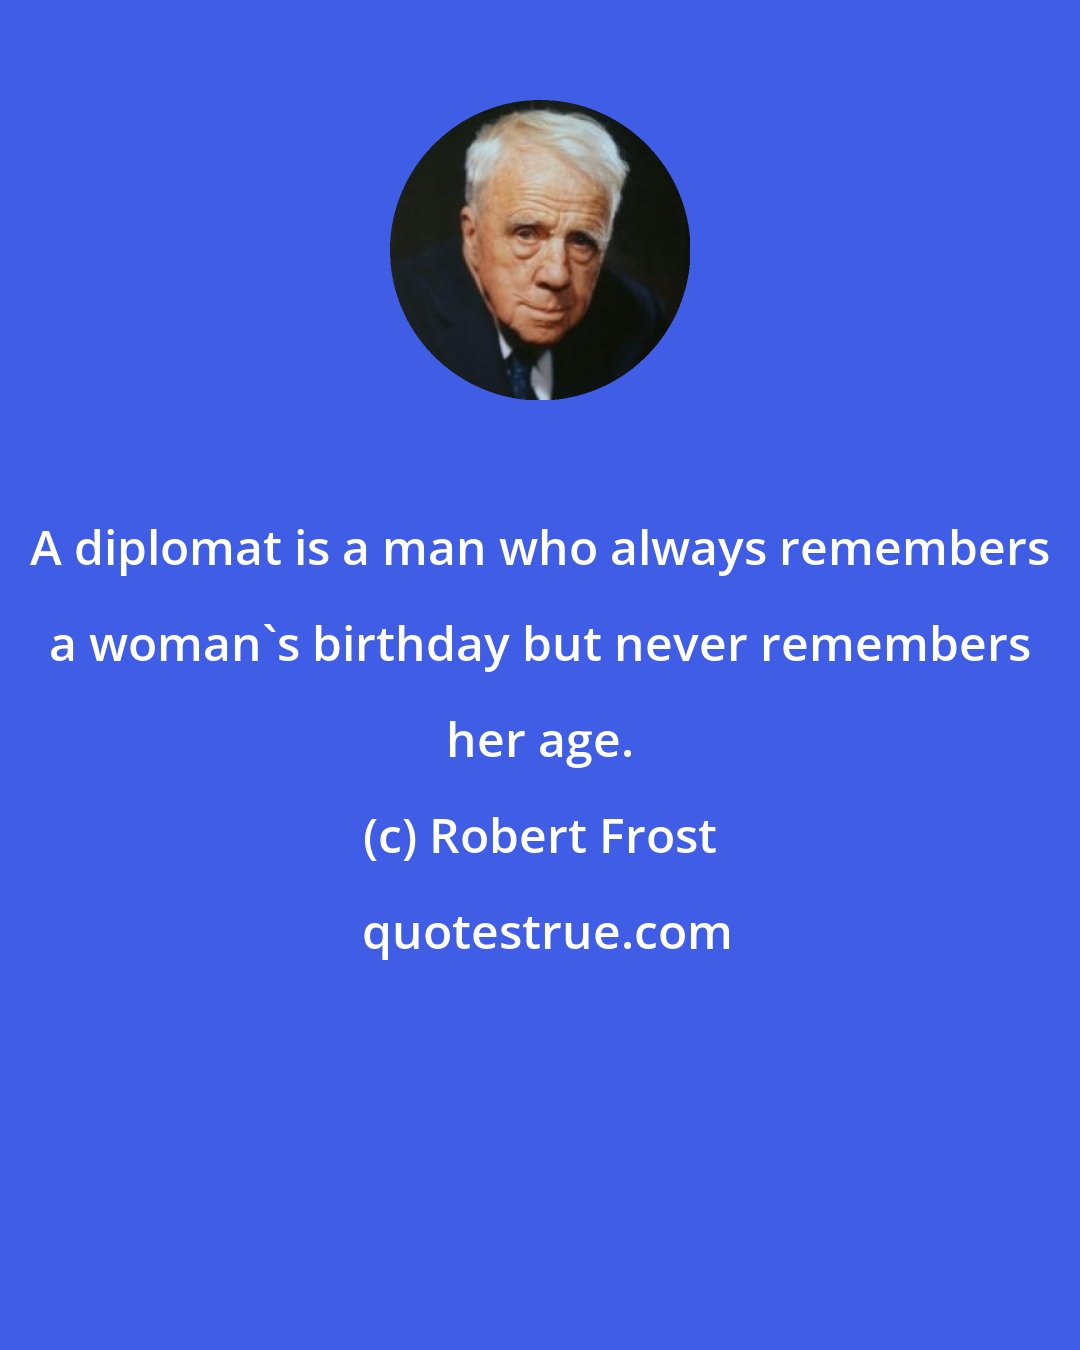 Robert Frost: A diplomat is a man who always remembers a woman's birthday but never remembers her age.